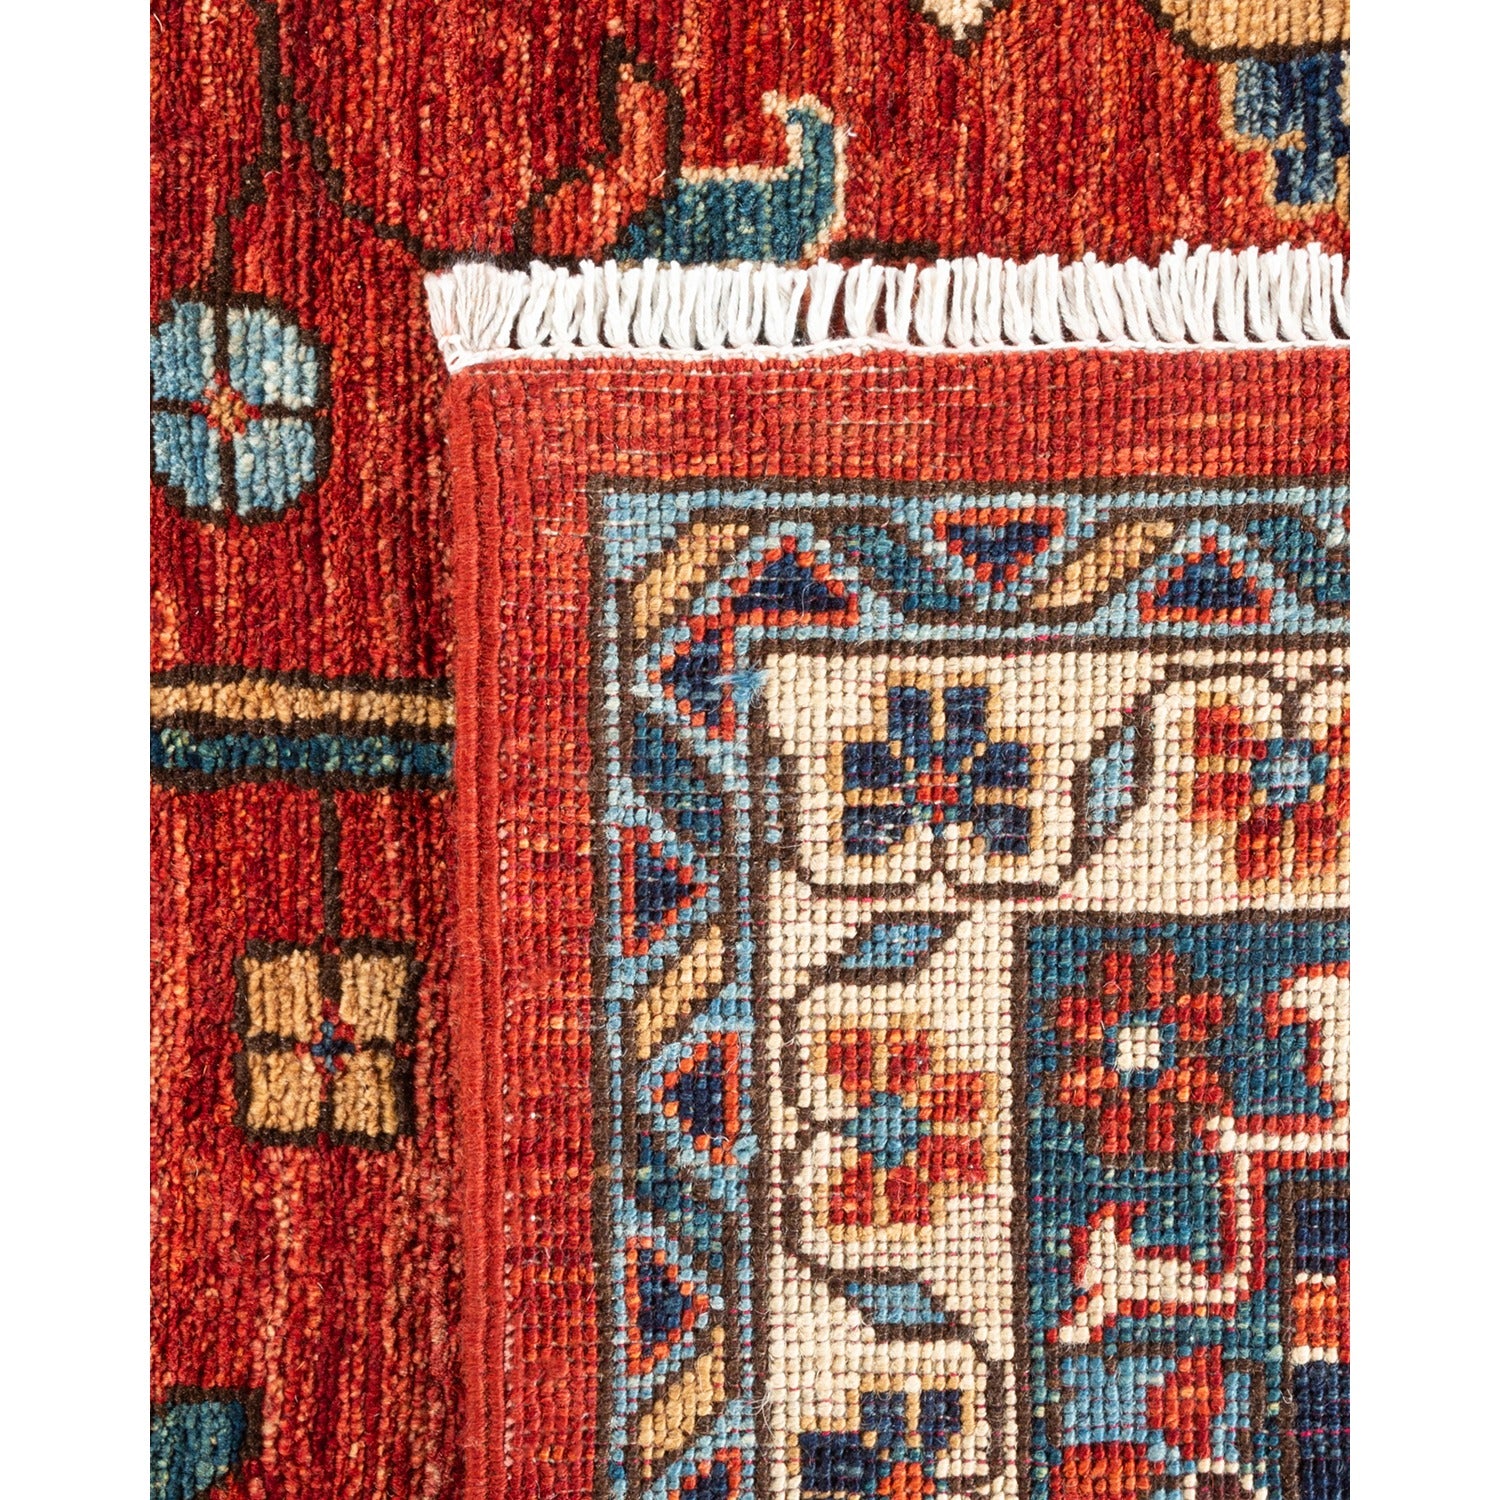 Close-up view of a handwoven rug showcasing intricate geometric and floral patterns in a rich color palette.